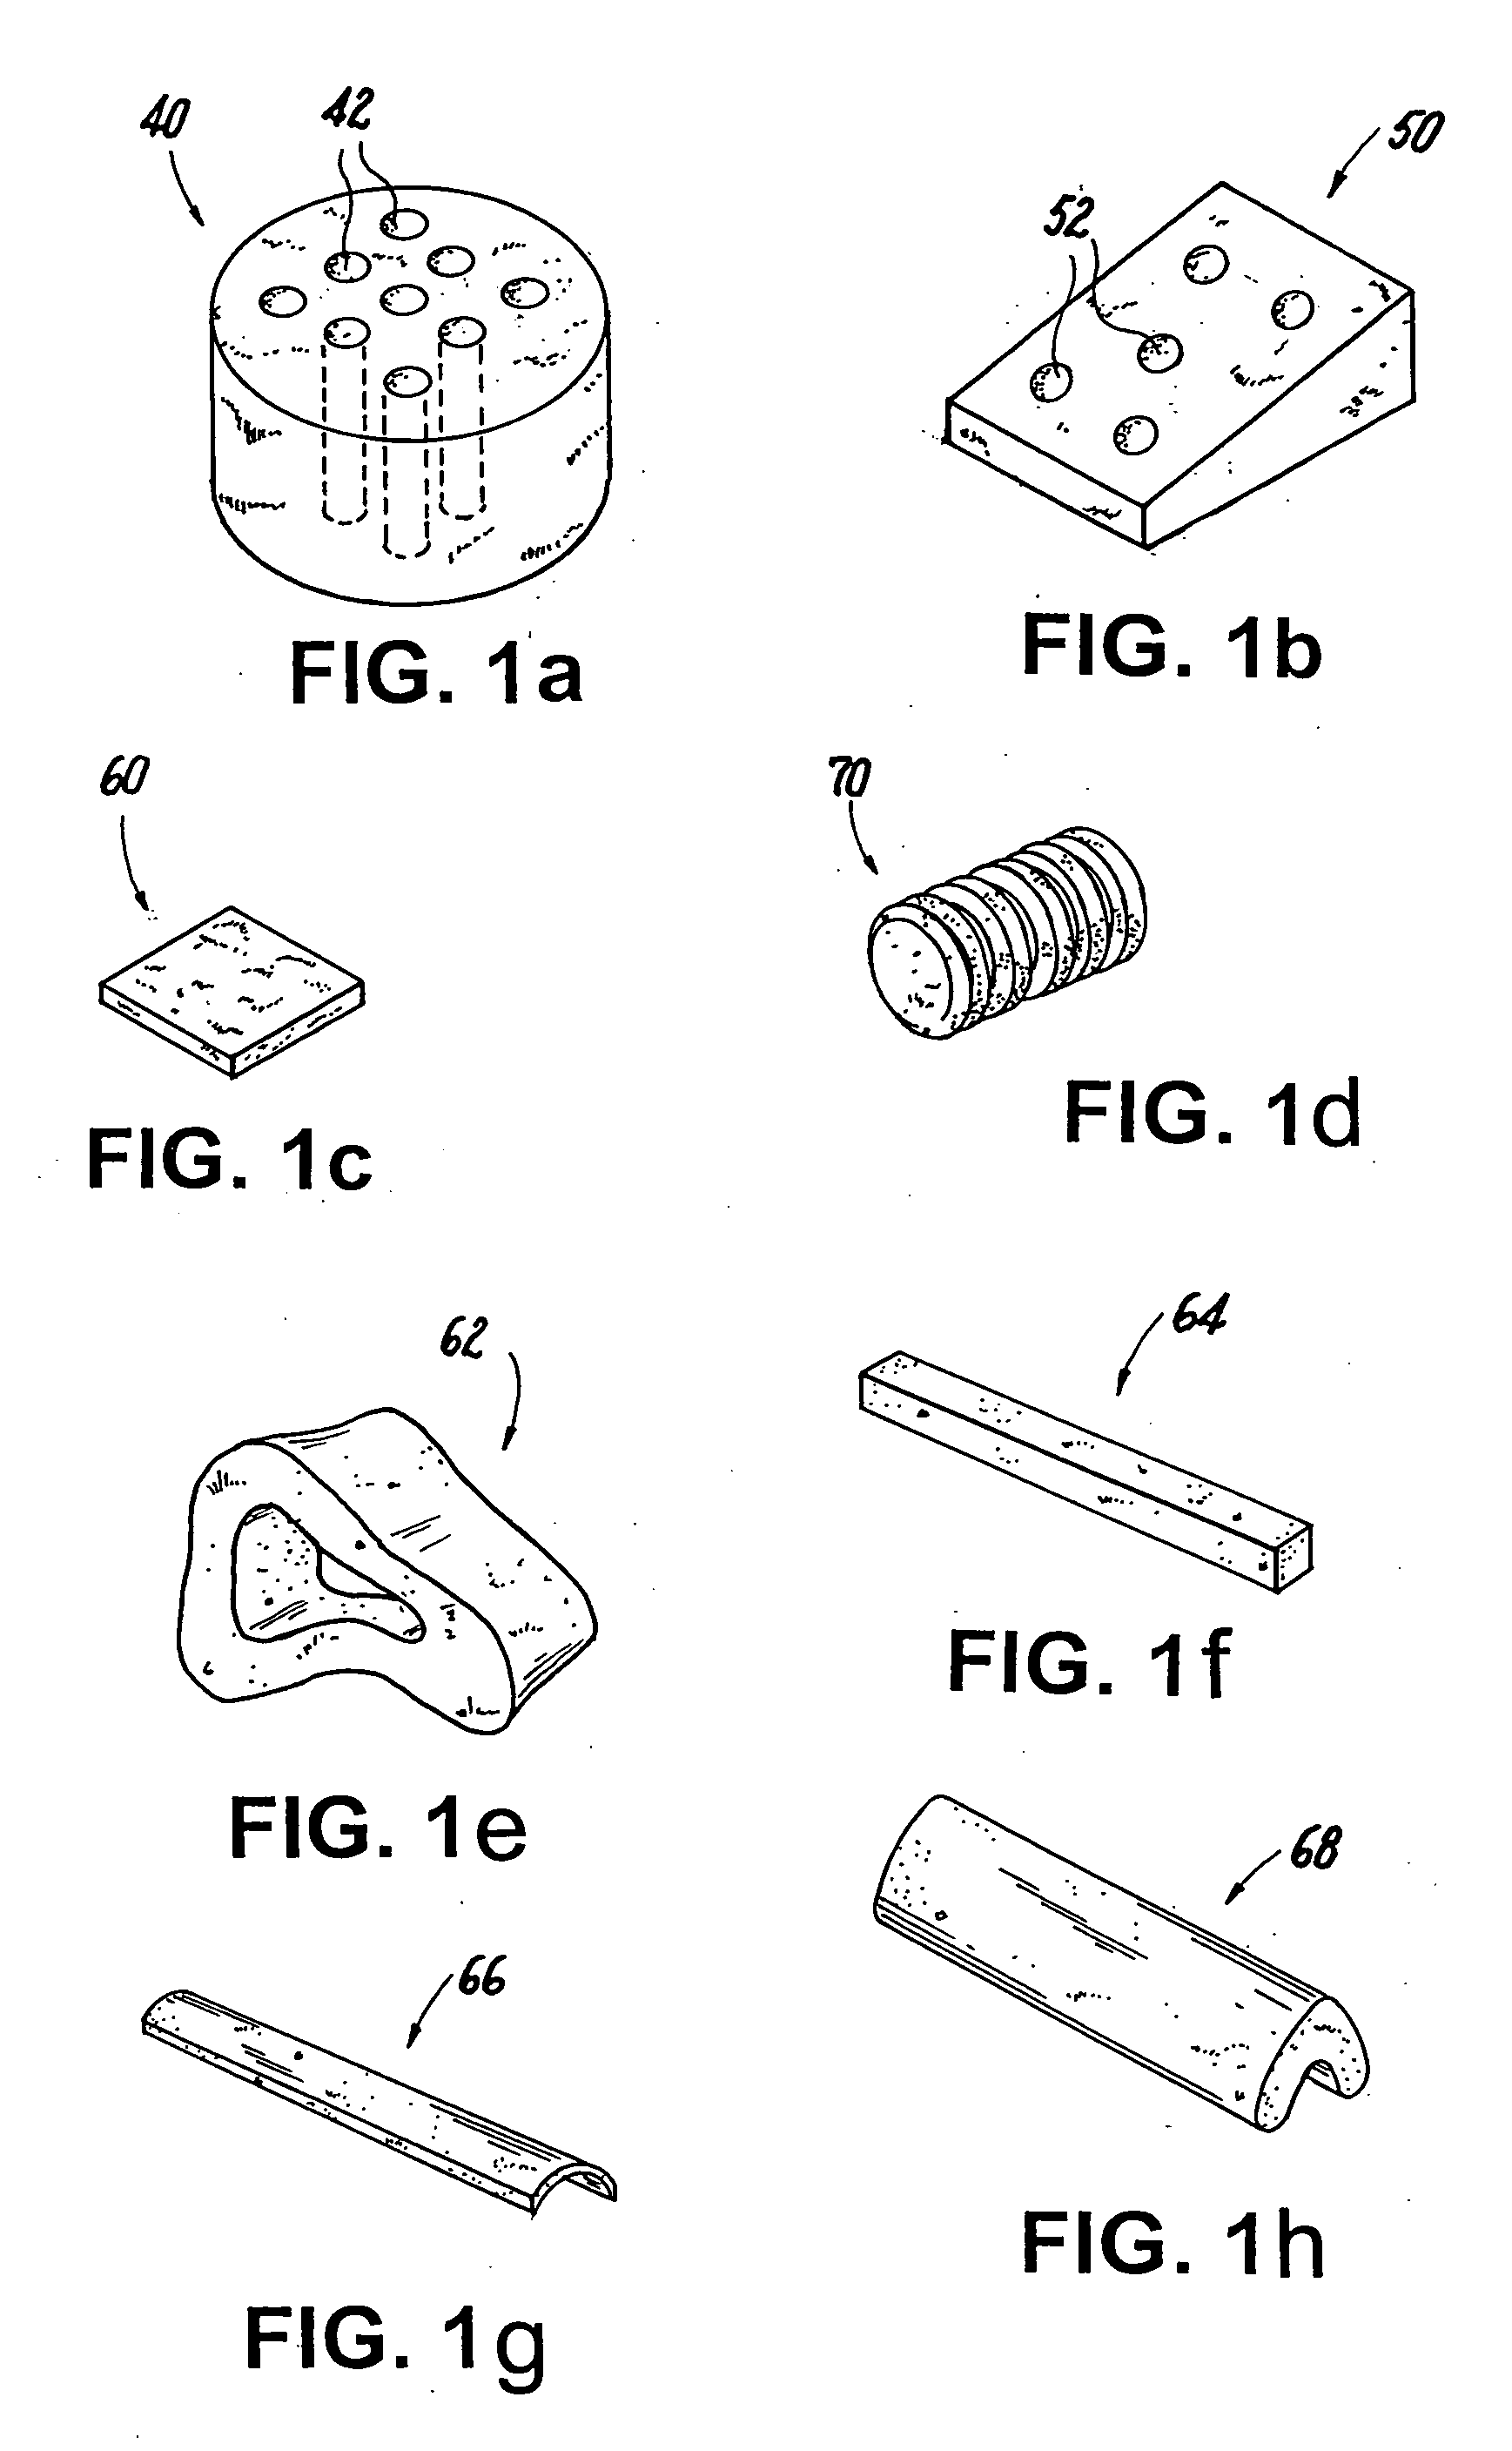 Shaped load-bearing osteoimplant and methods of making same